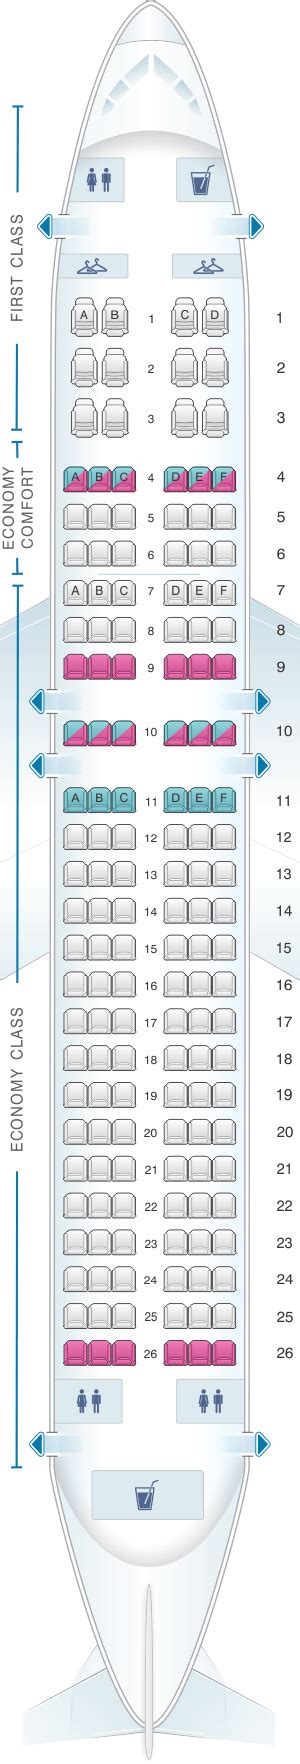 Delta A320 Seating Map